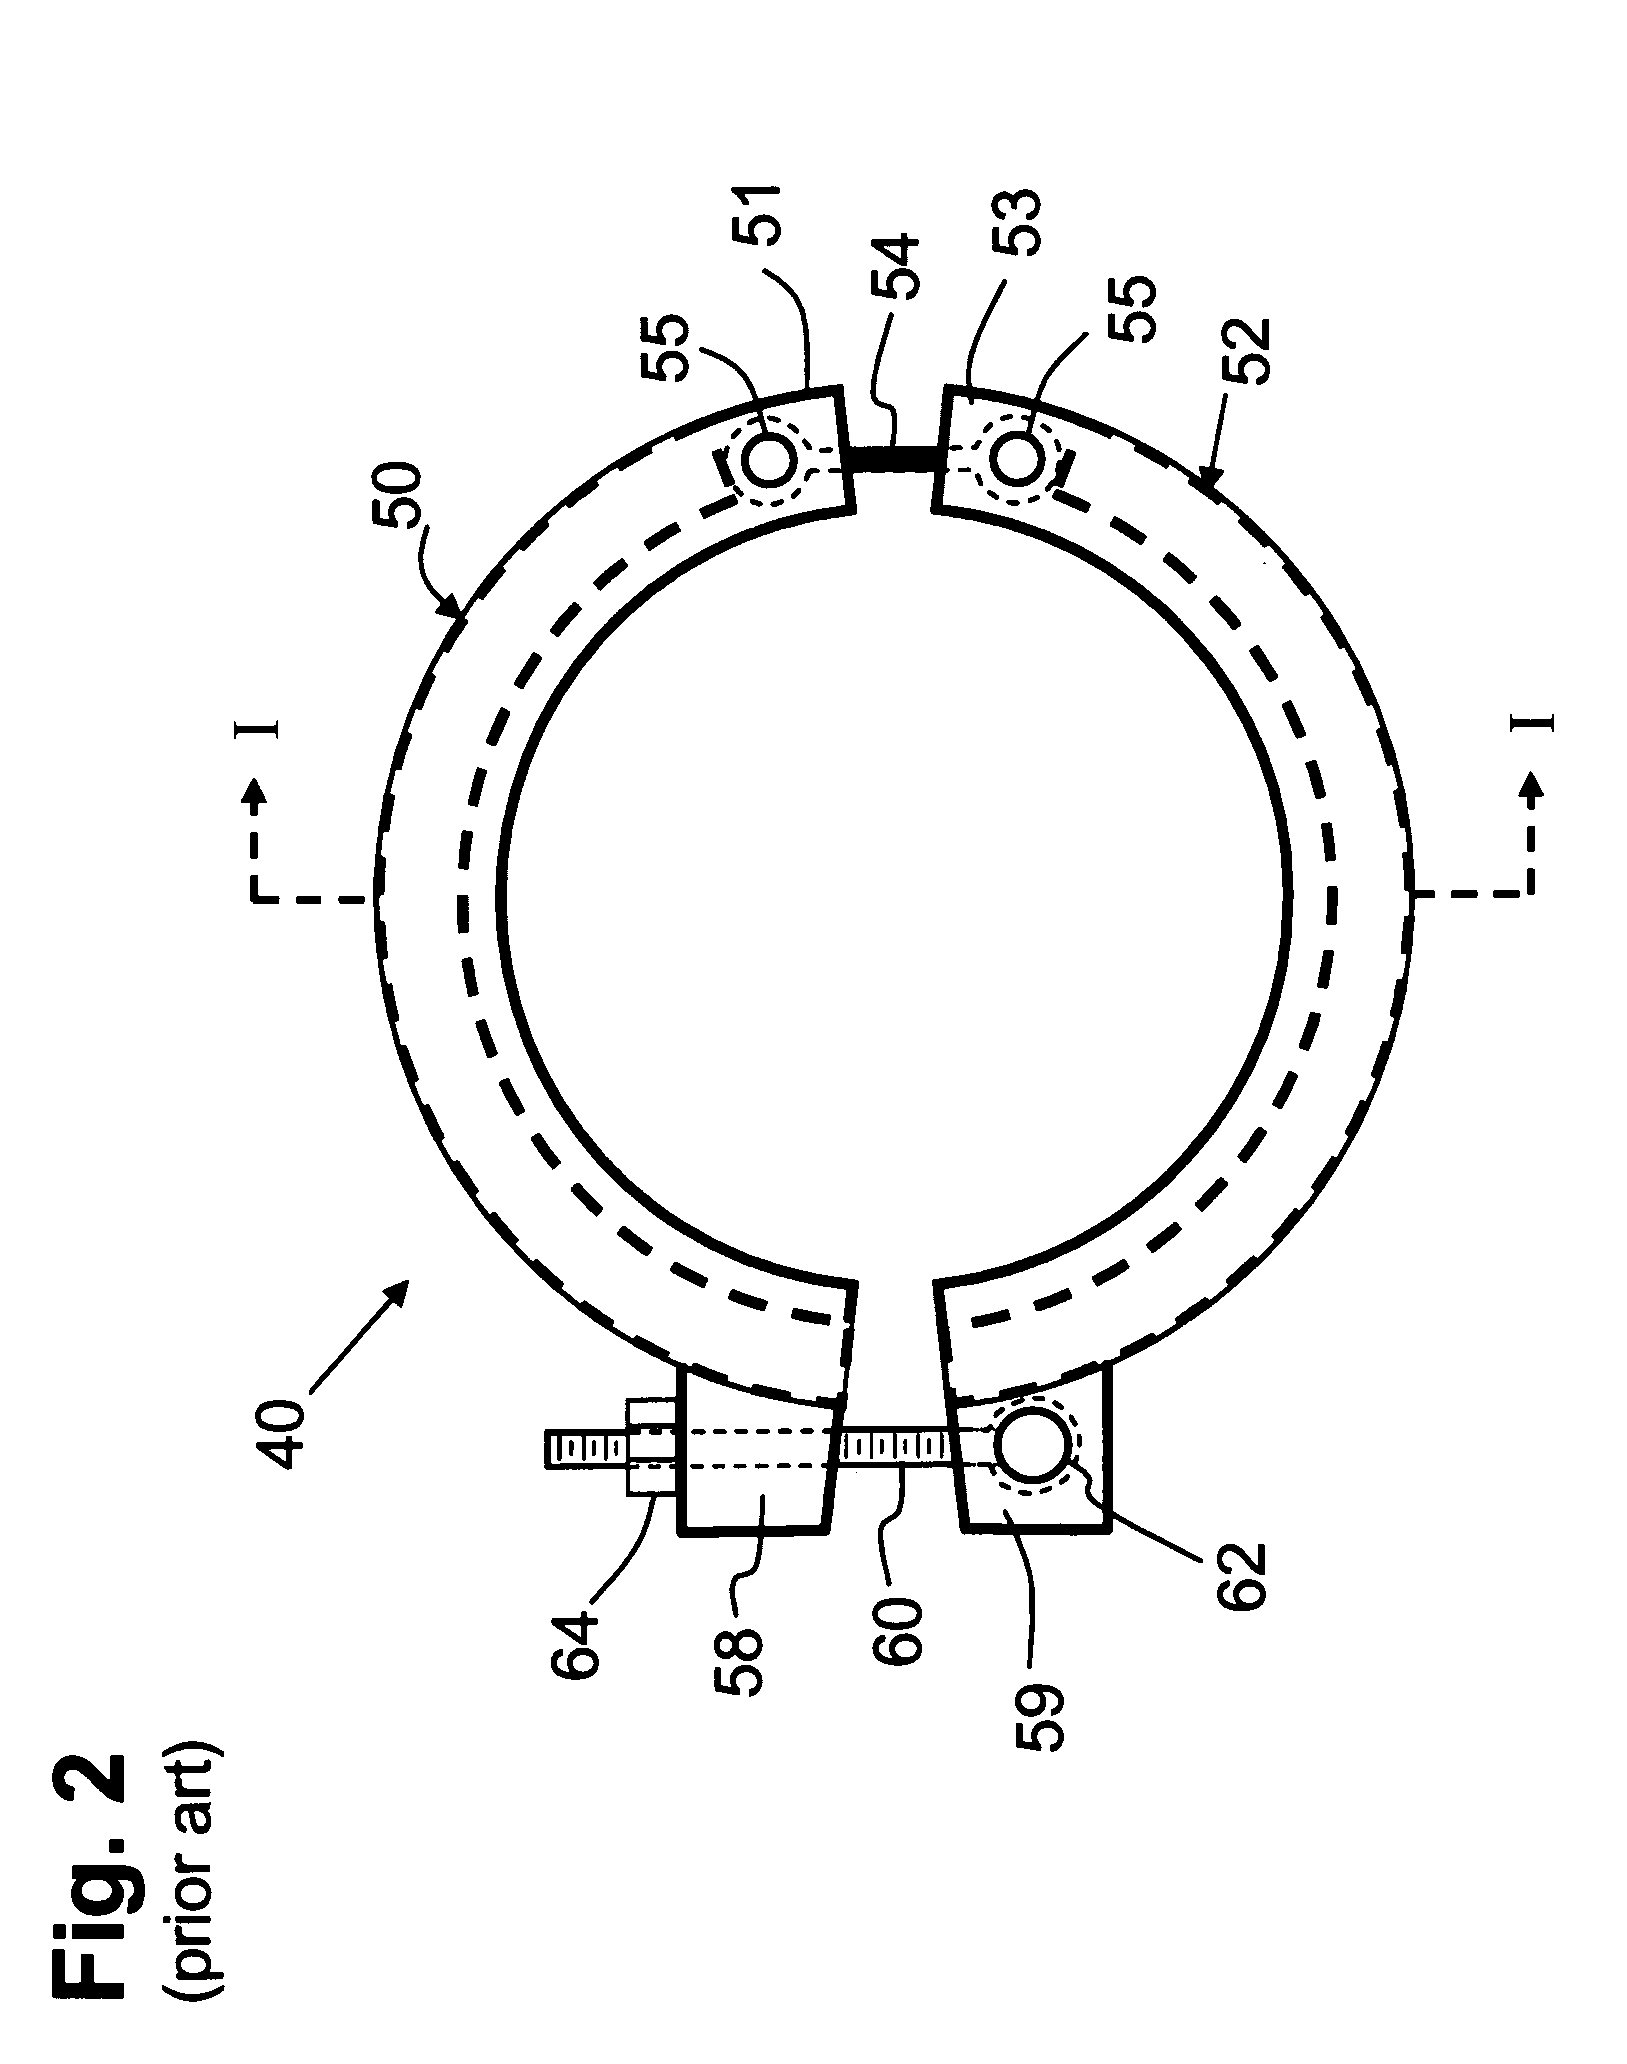 Self-aligning aseptic flanged joint